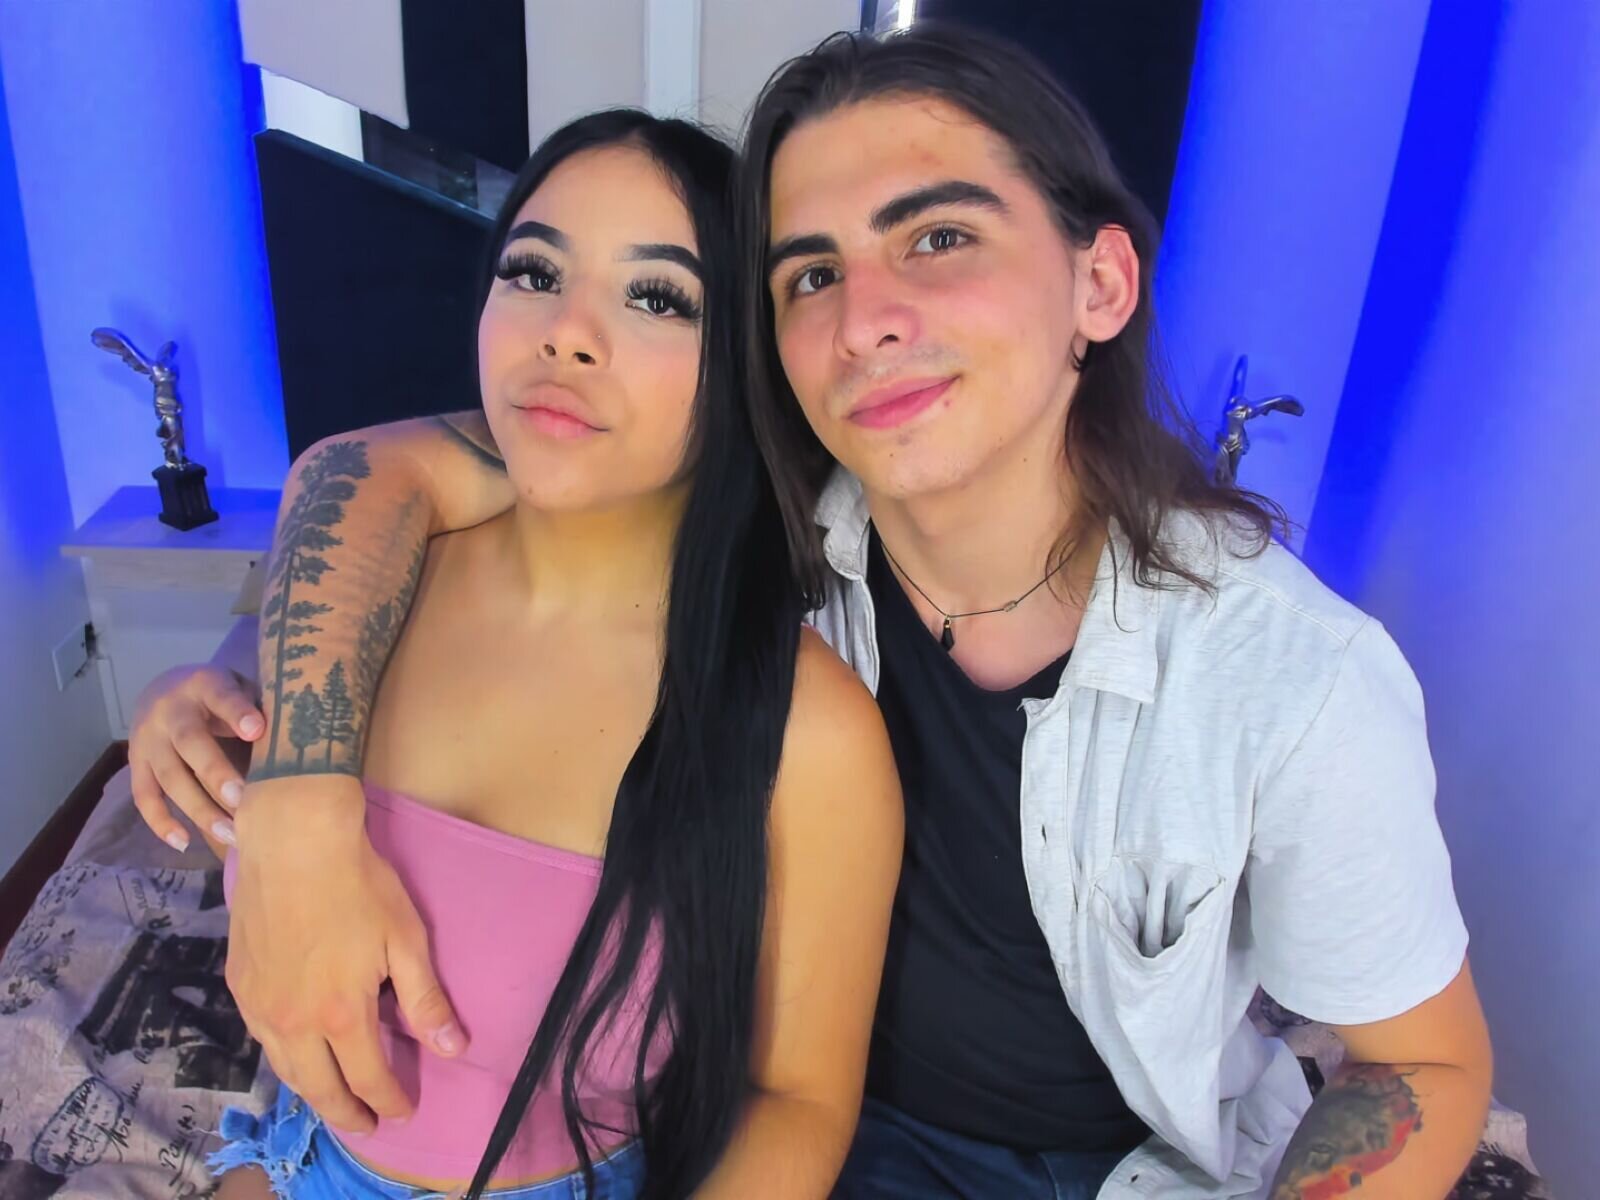 Free Live Sex Chat With KeityAndLucas